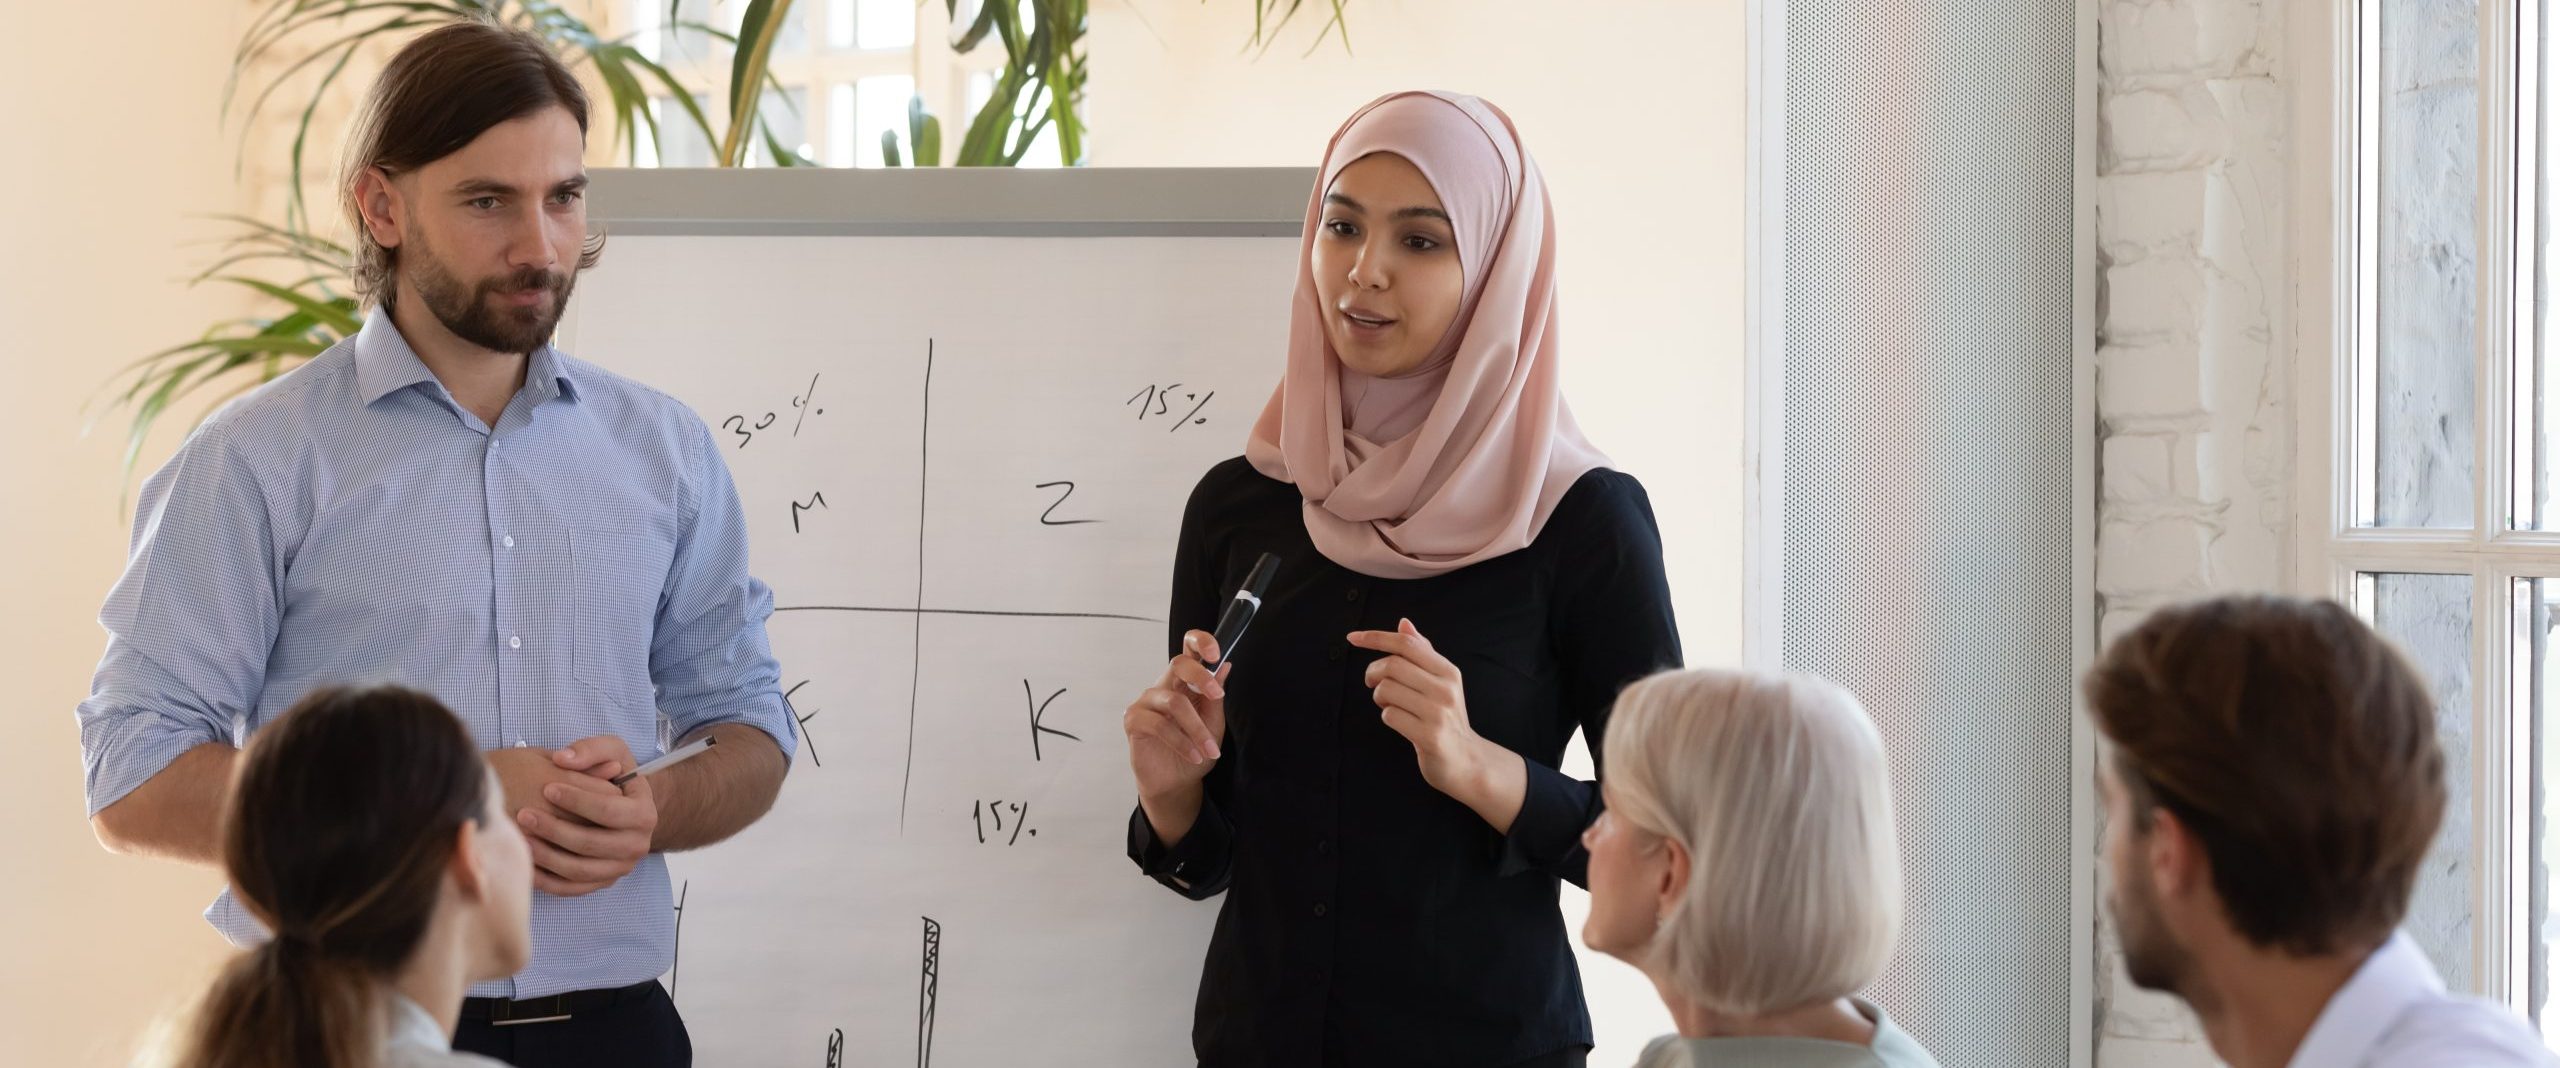 a woman in a headscarf and a man with a blue shirtpresenting to a room of three people